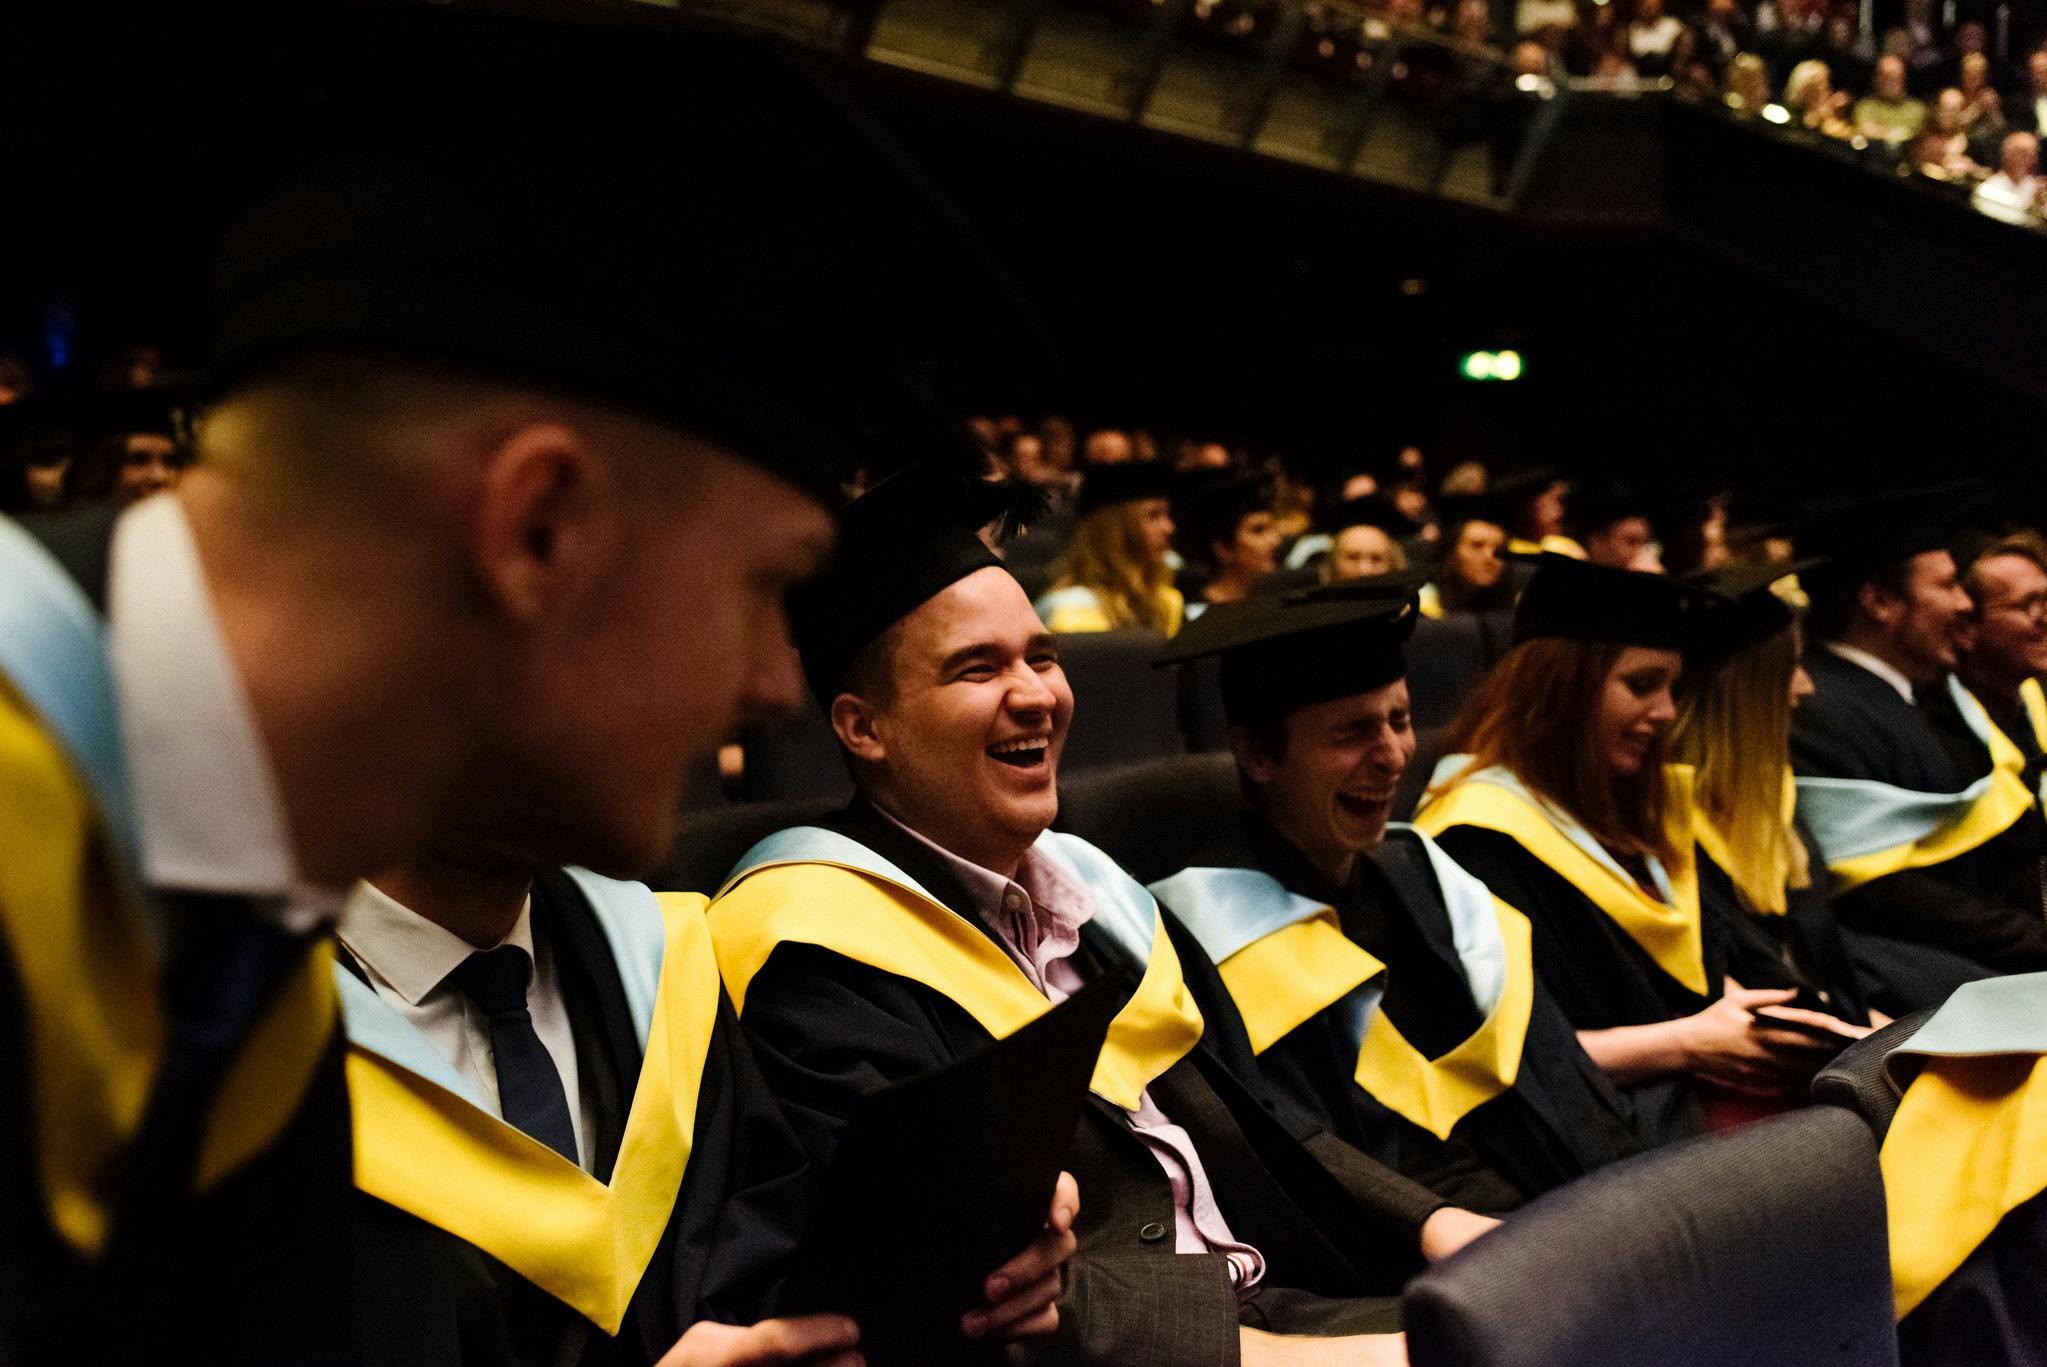 Plymouth College of Art Graduation Ceremony 2019 smiling students